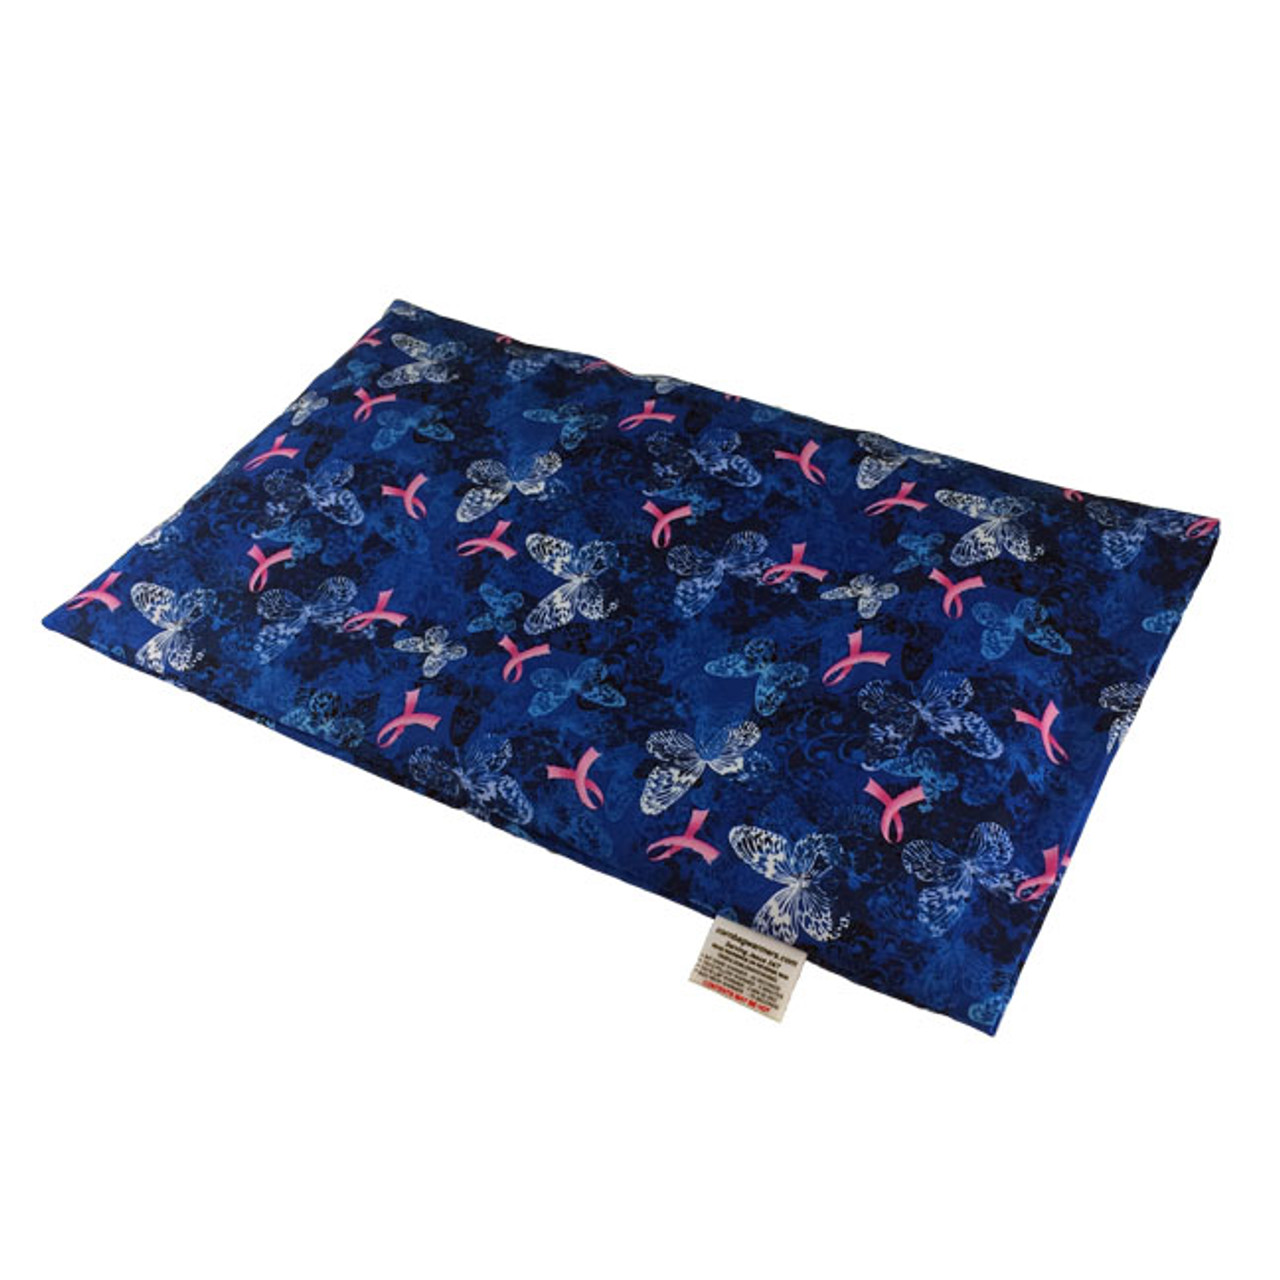 Lap Warmer Microwave Corn Heating Pad - Butterflies on Blue, Breast Cancer Awareness